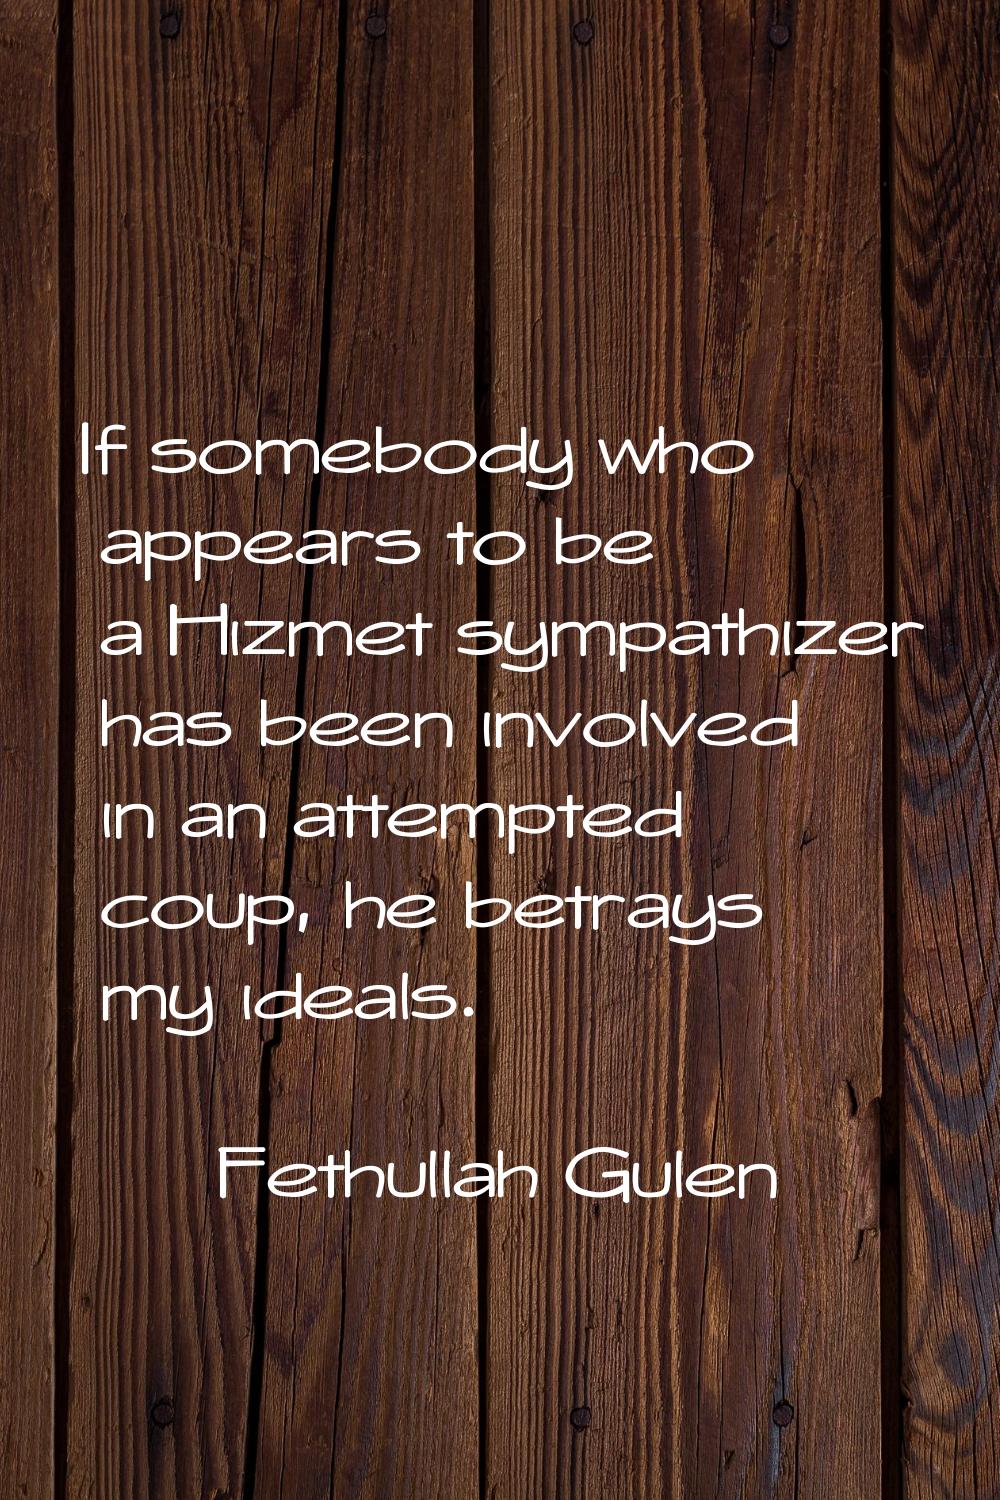 If somebody who appears to be a Hizmet sympathizer has been involved in an attempted coup, he betra